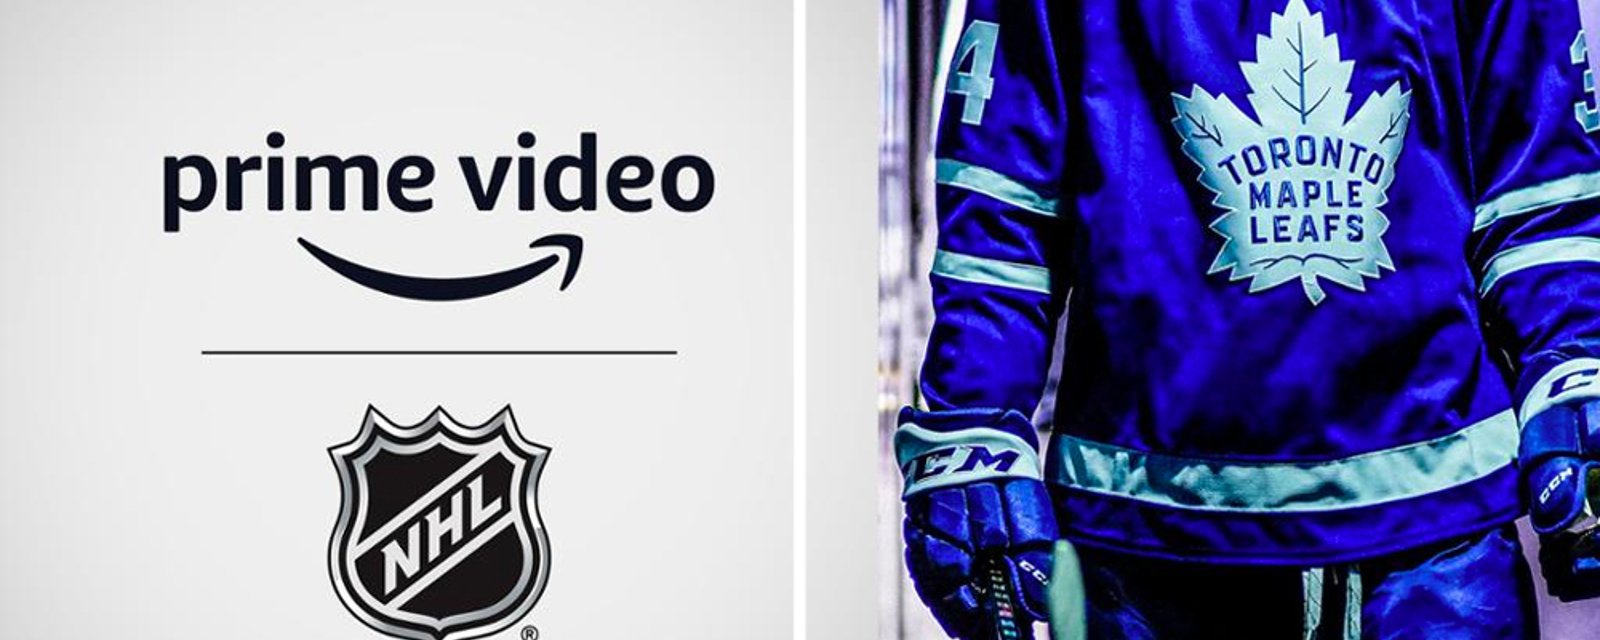 Leafs producing Amazon documentary series titled “All or Nothing” for 2021 season 